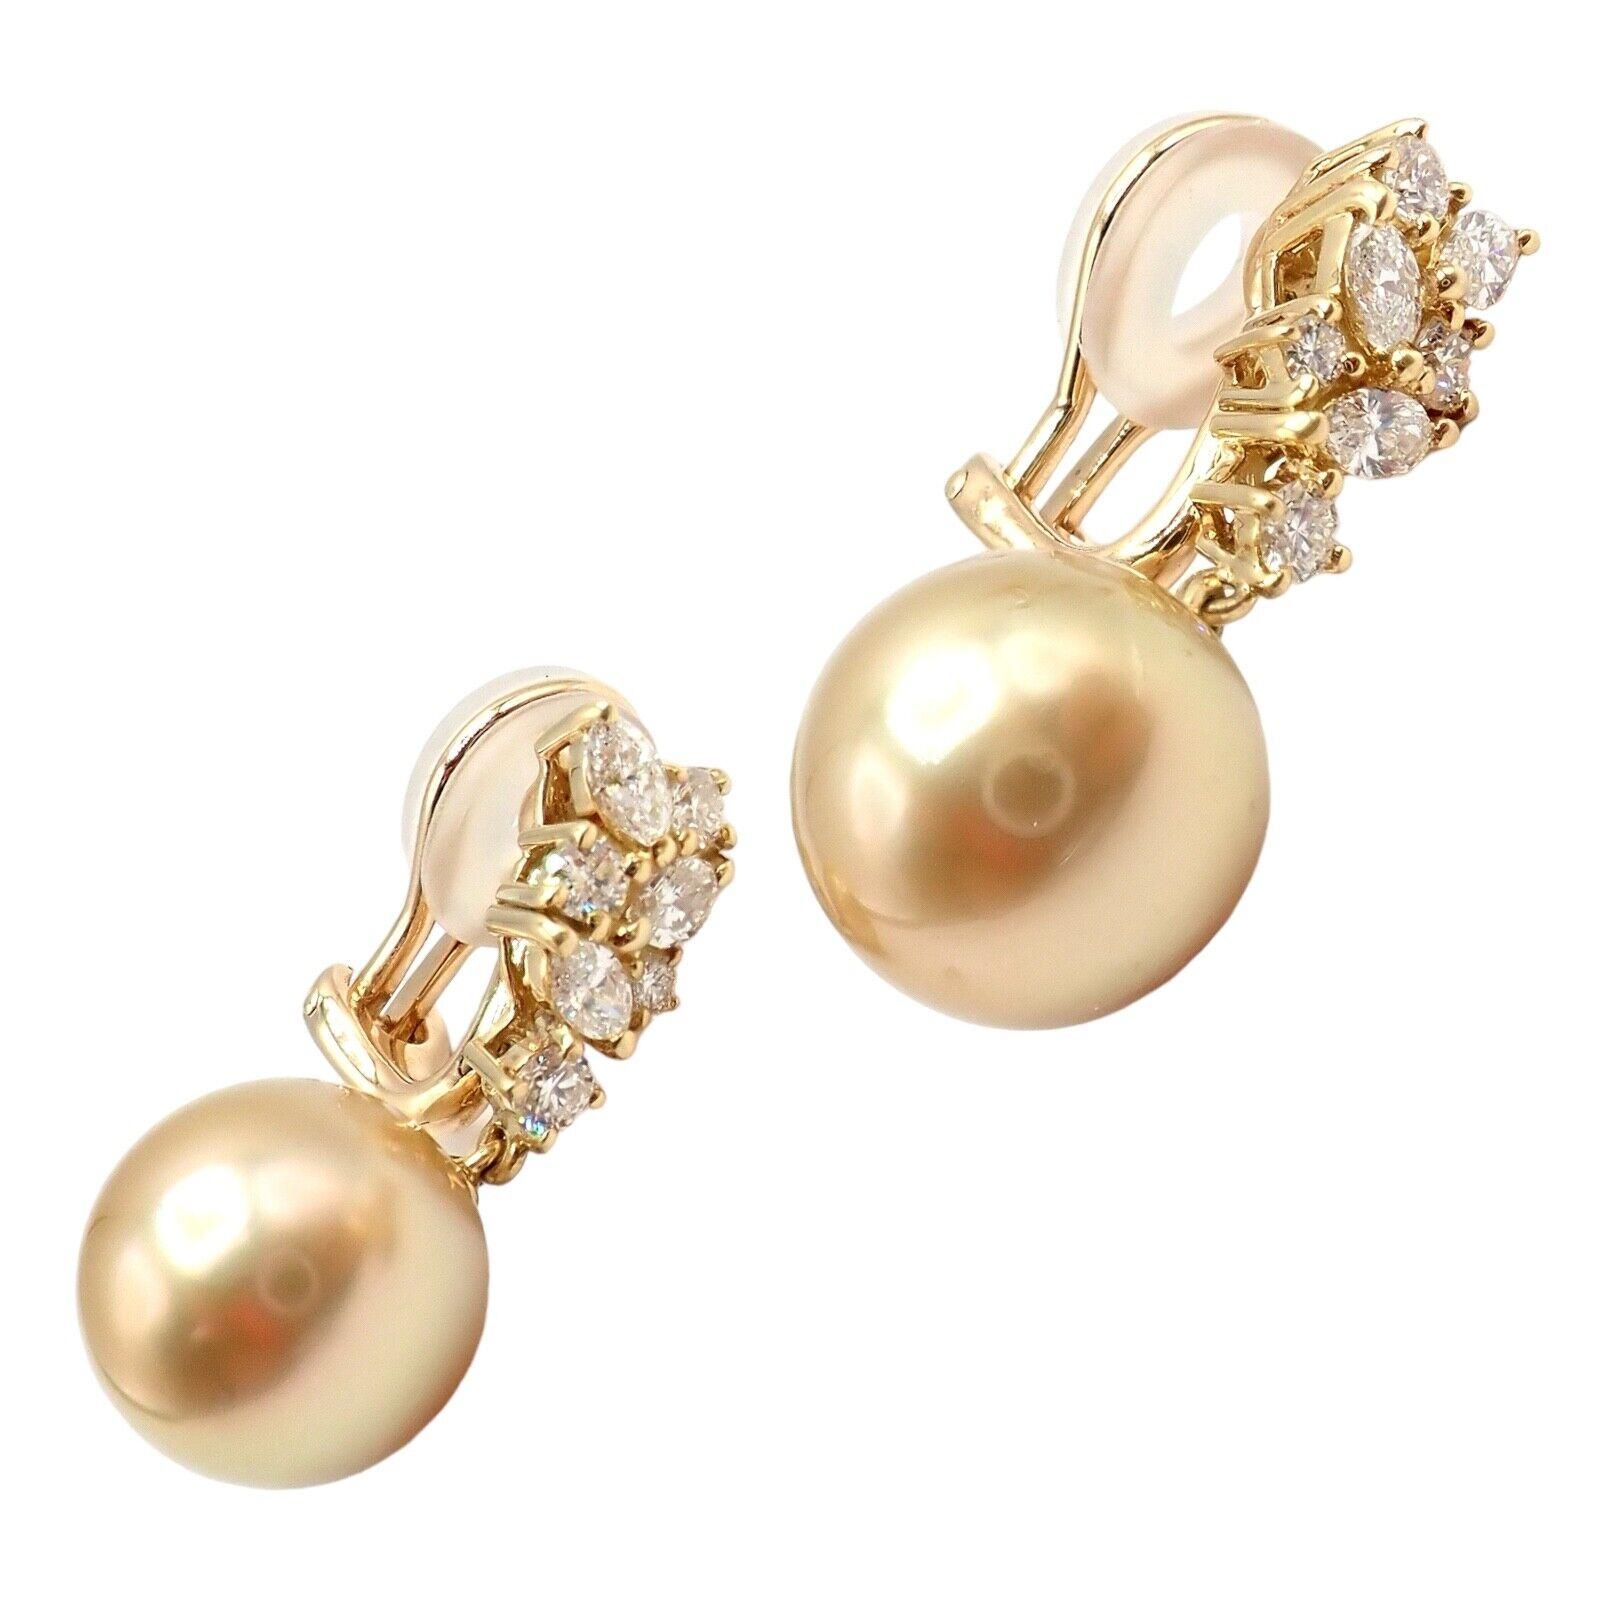 18k Yellow Gold Diamond 11.5mm Golden South Sea Pearl earrings by Mikimoto. 
Embrace timeless elegance with these Rare Mikimoto 18k Yellow Gold Diamond 11.5mm Golden Southsea Pearl Earrings. The earrings showcase radiant golden Southsea pearls, with